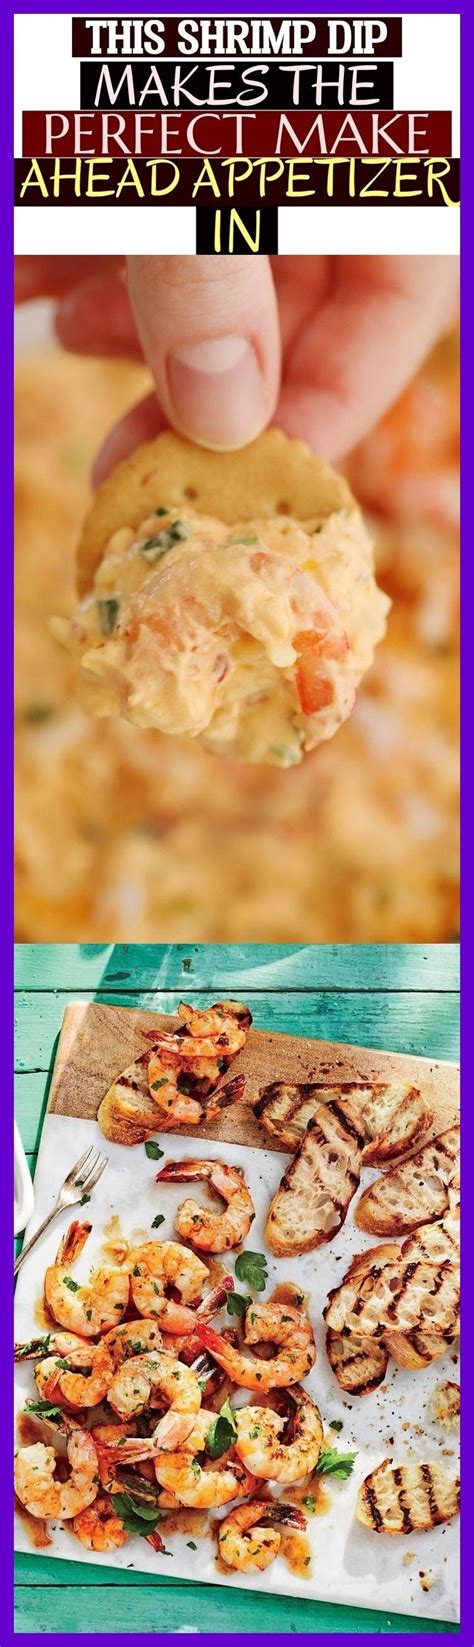 Make ahead appetizers are great because you don't need to worry about losing time spent with your guests making them or rushing before an event. This Shrimp Dip Makes The Perfect Make Ahead Appetizer In ~ #spendwithpennies #s..., #ahead # ...